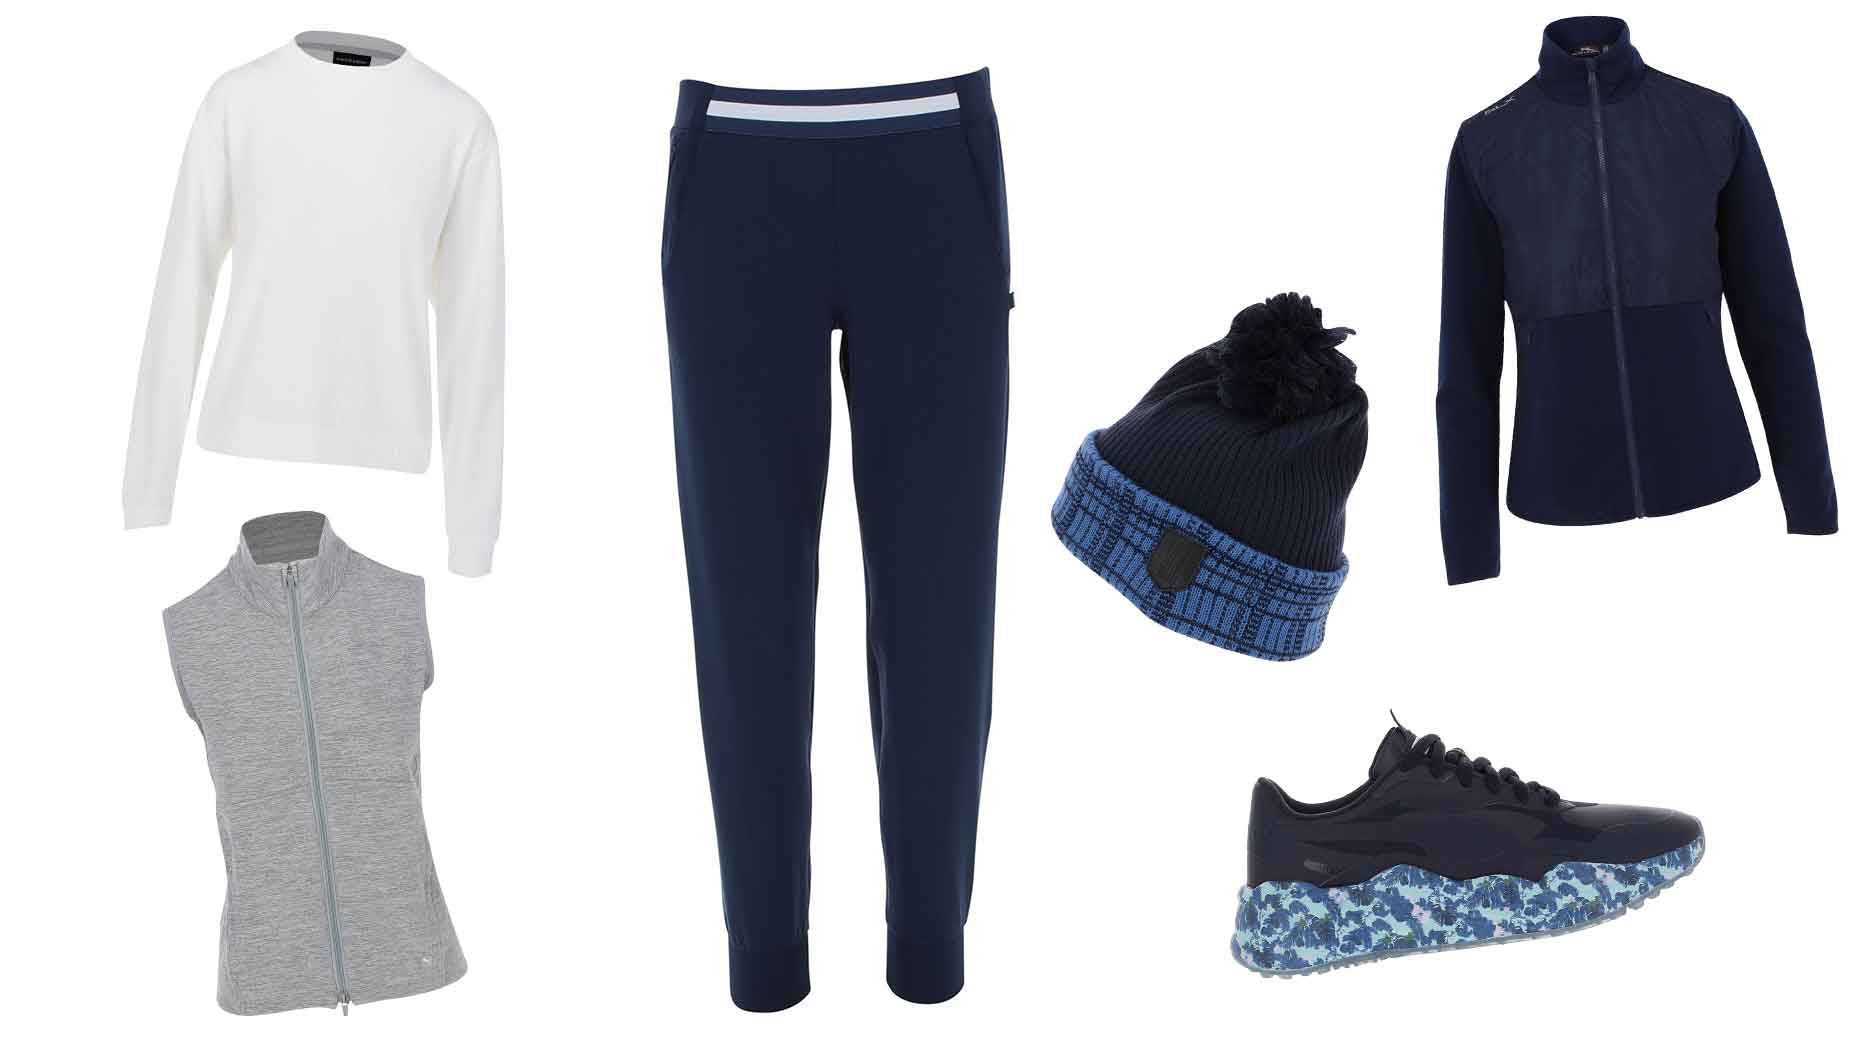 Create the perfect winter golf outfit with these 6 fashionable pieces